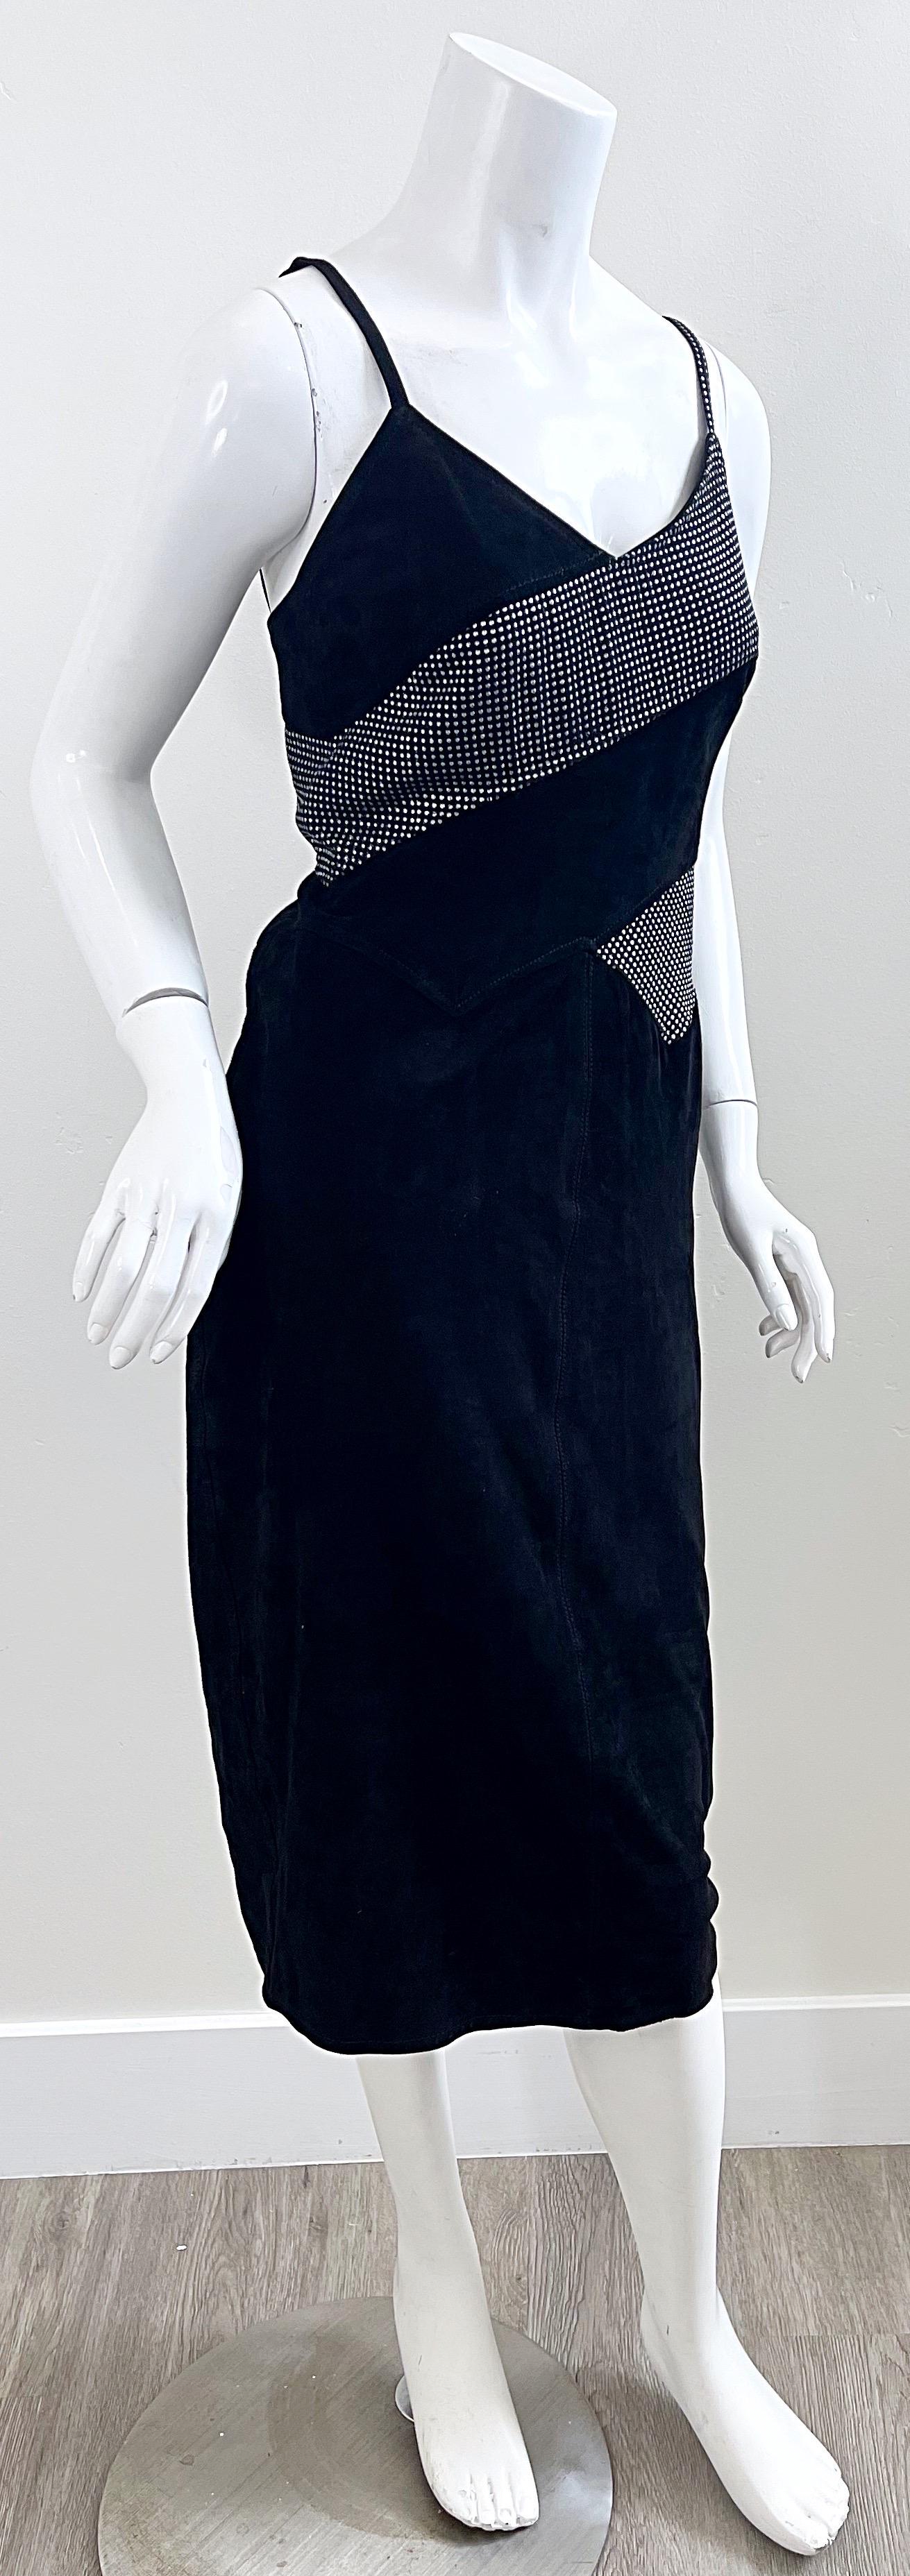 Fendi 1980s Fendissime Black Silver Suede Leather Vintage 80s Hand Painted Dress For Sale 6